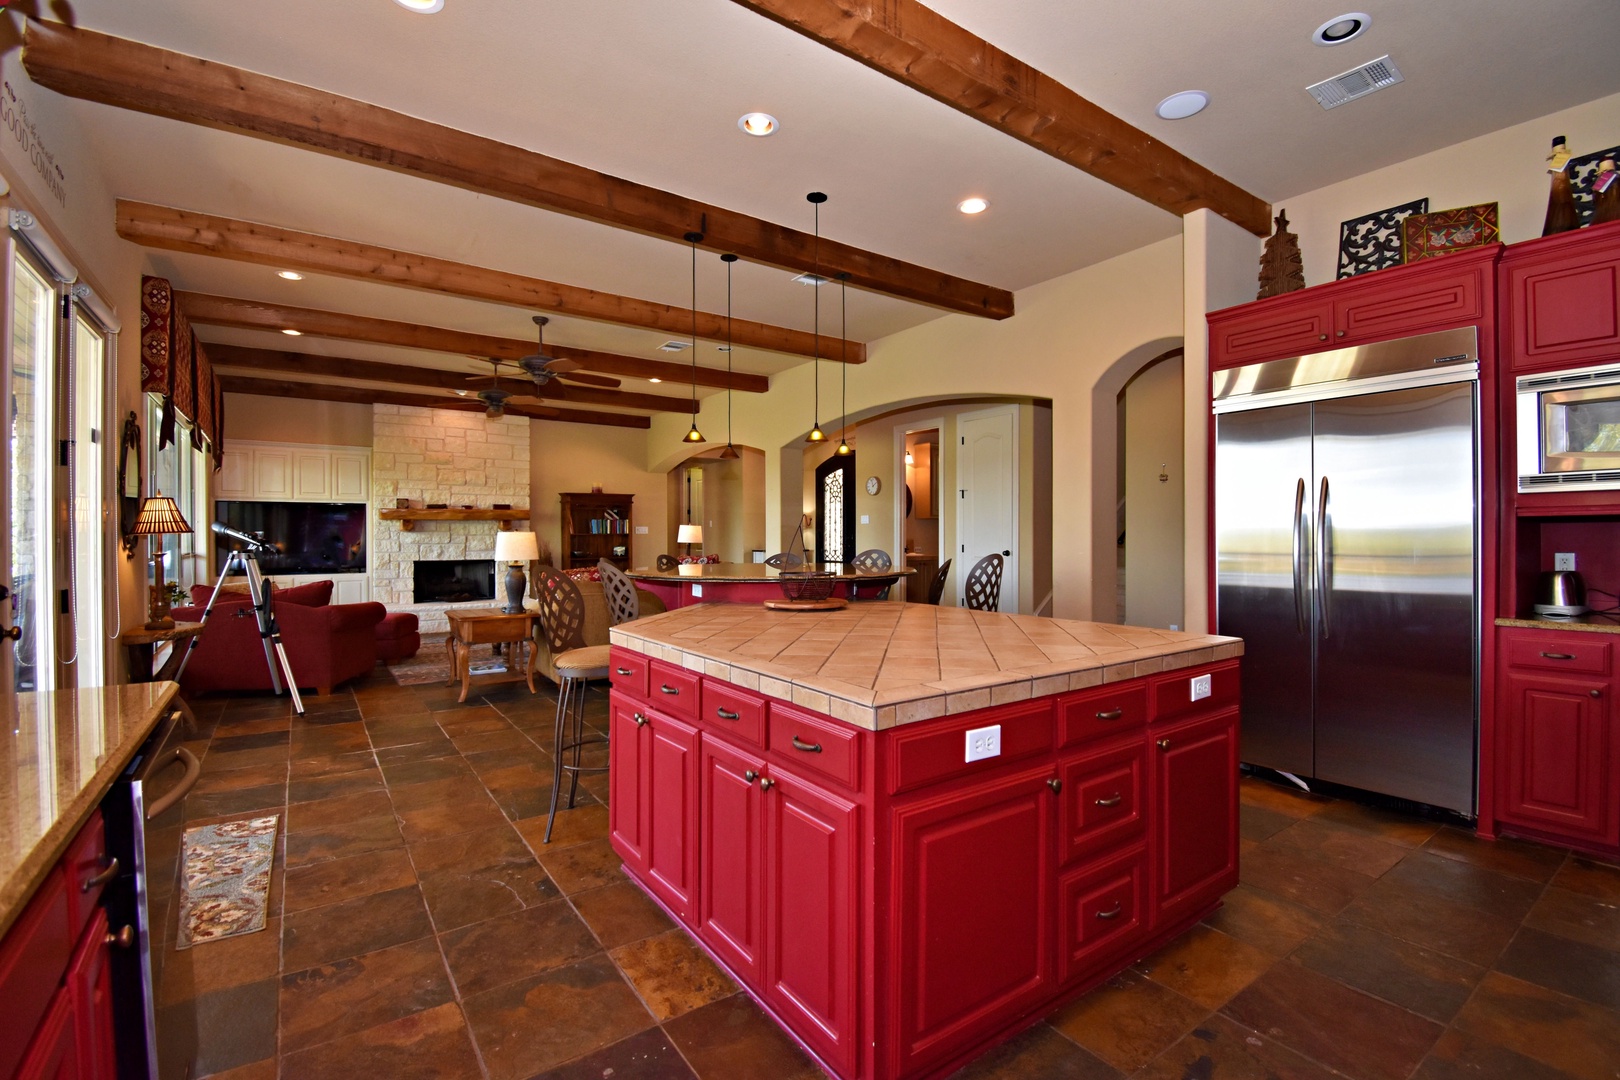 Large kitchen island with counter seating